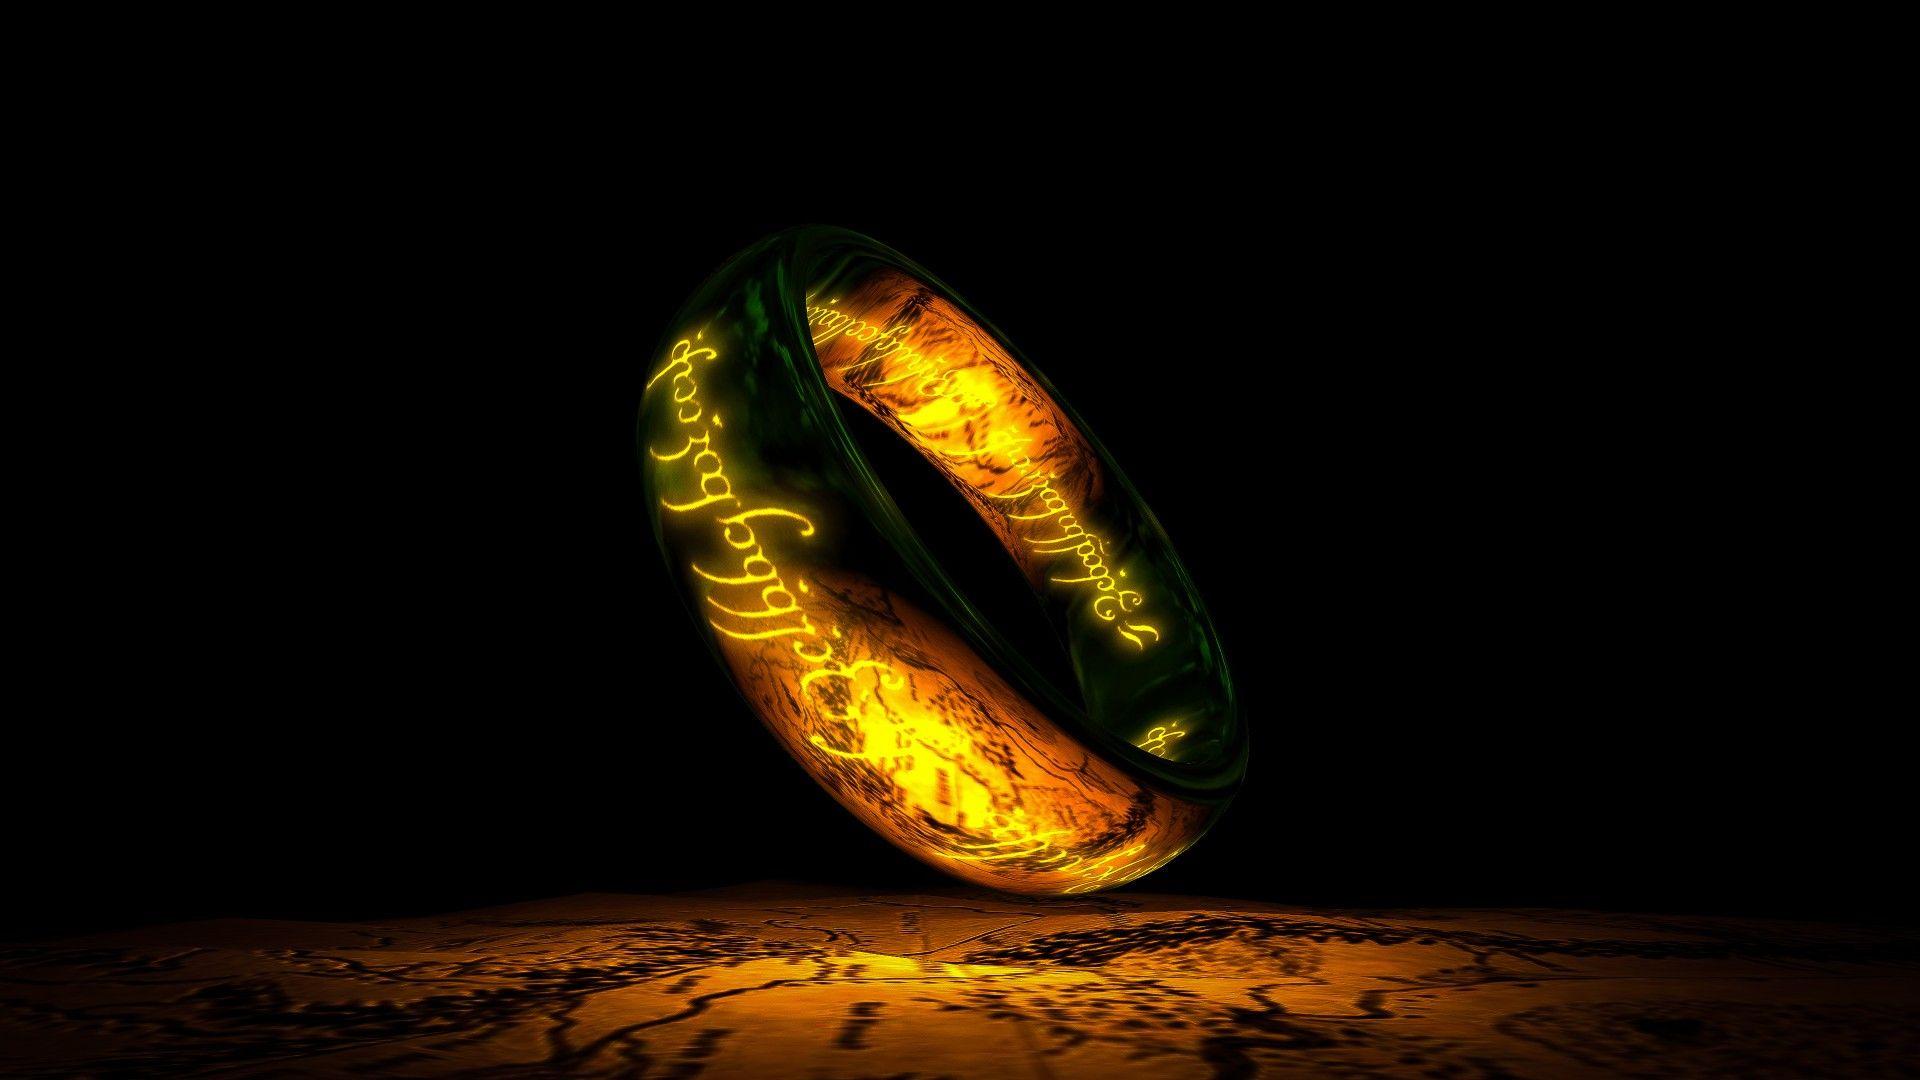 the lord of the rings ring inscription high resolution